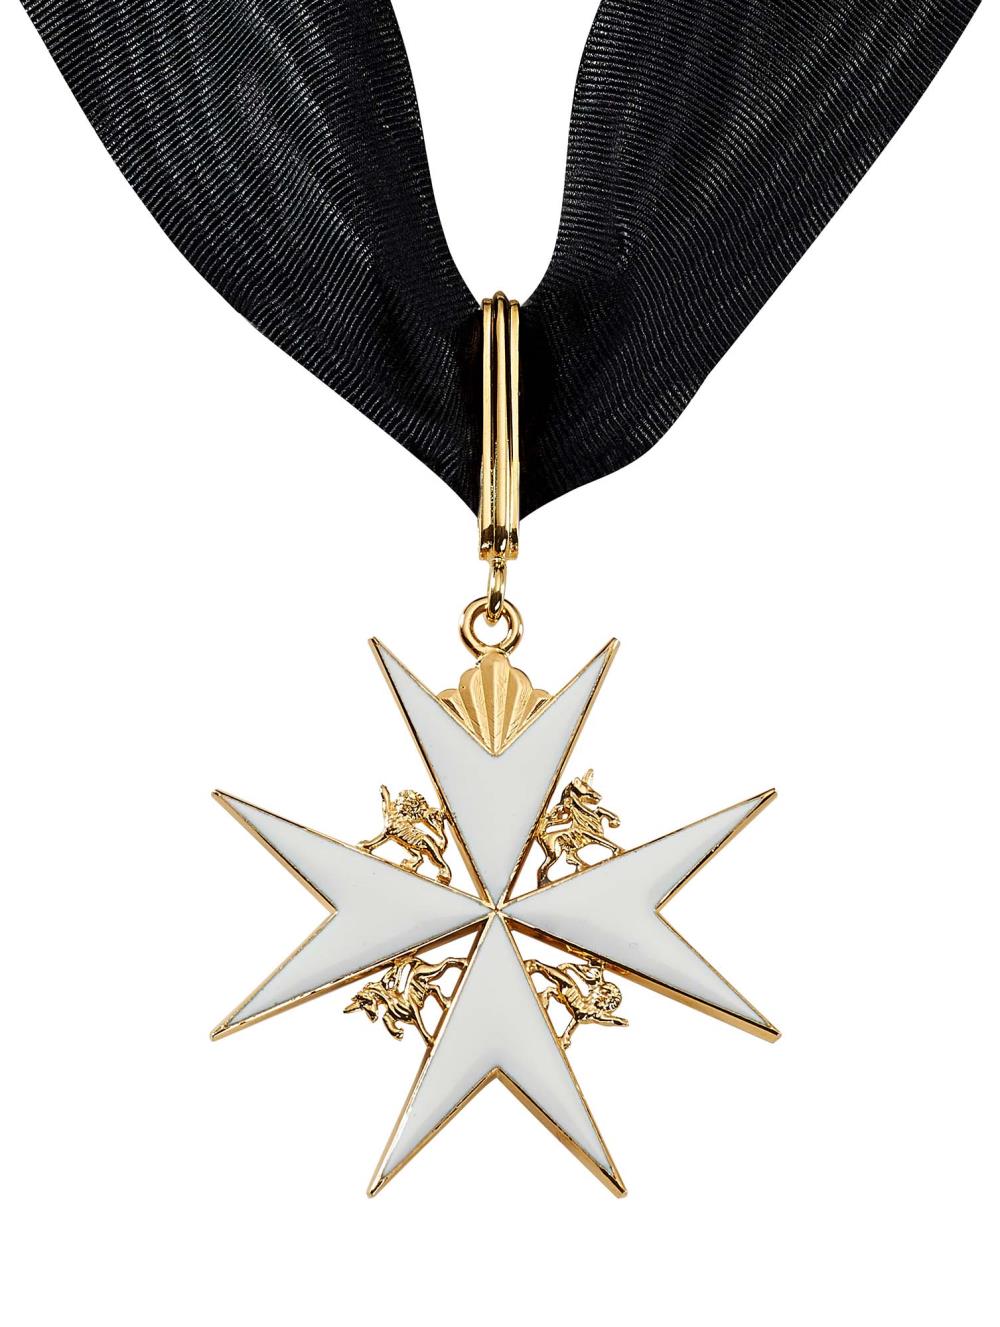 Worcestershire Medal Service: Knight of Justice Order of St John